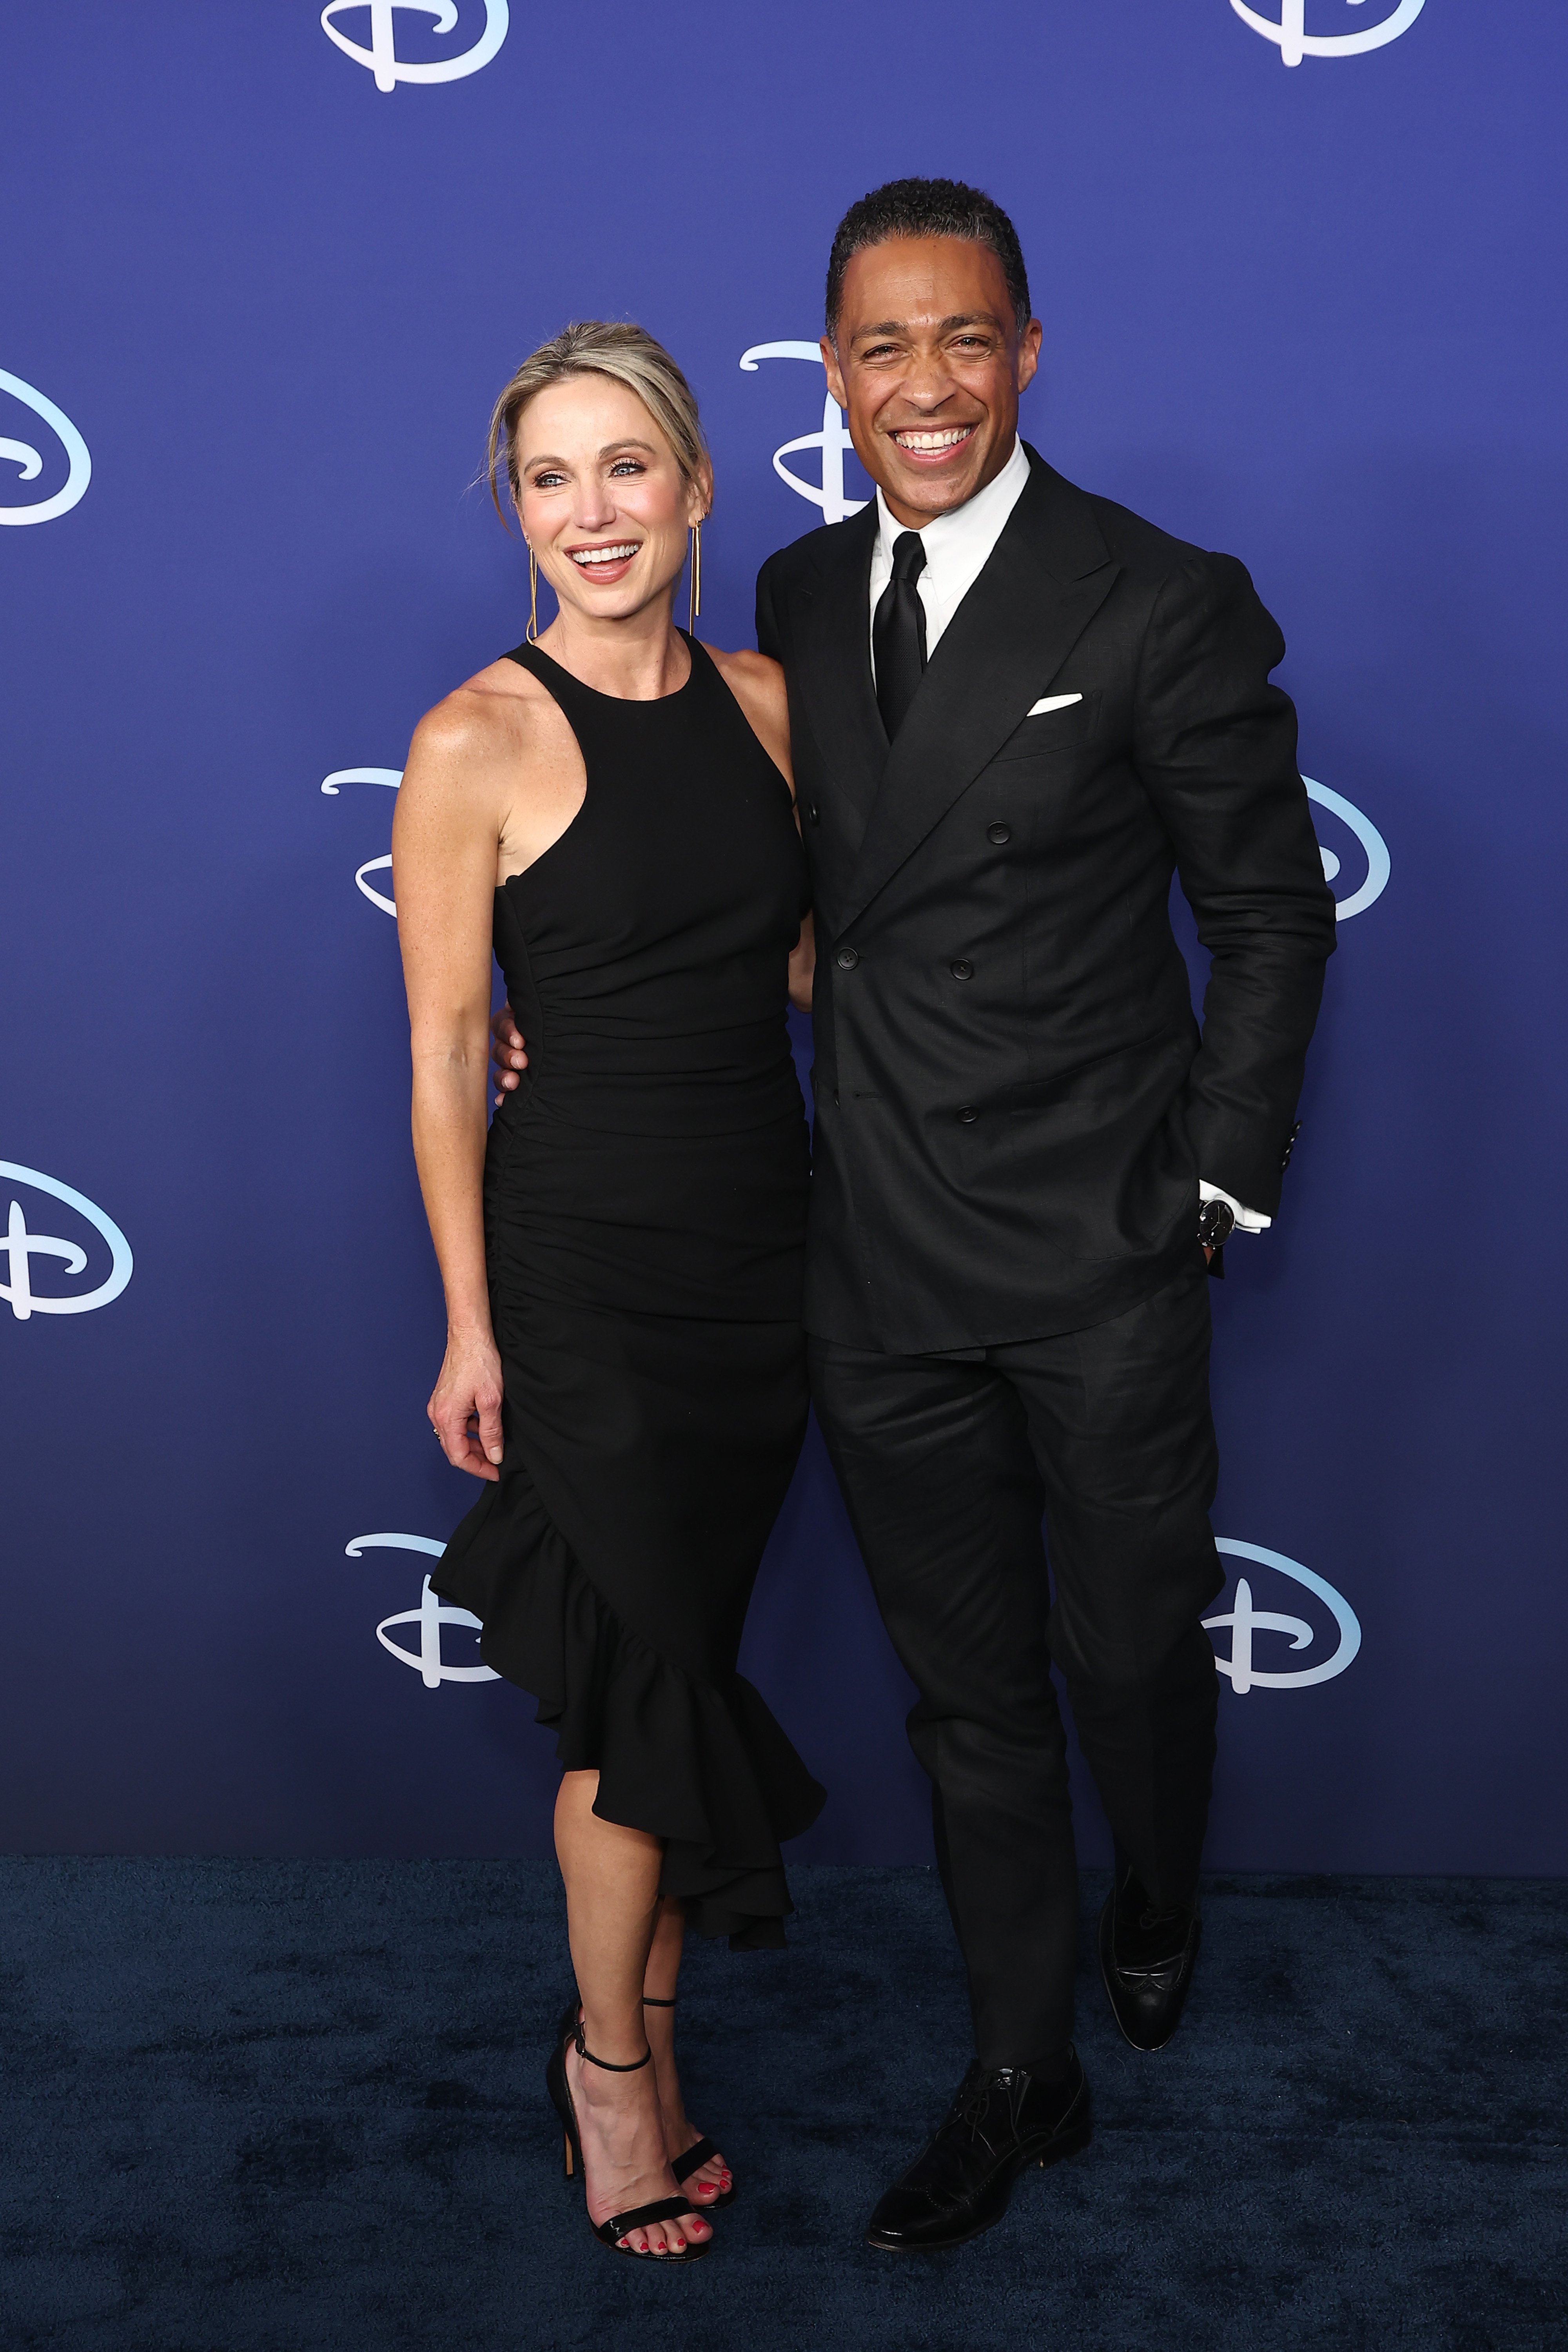 Amy Robach and TJ Holmes at the 2022 ABC Disney Upfront on May 17, 2022, in New York City | Source: Getty Images